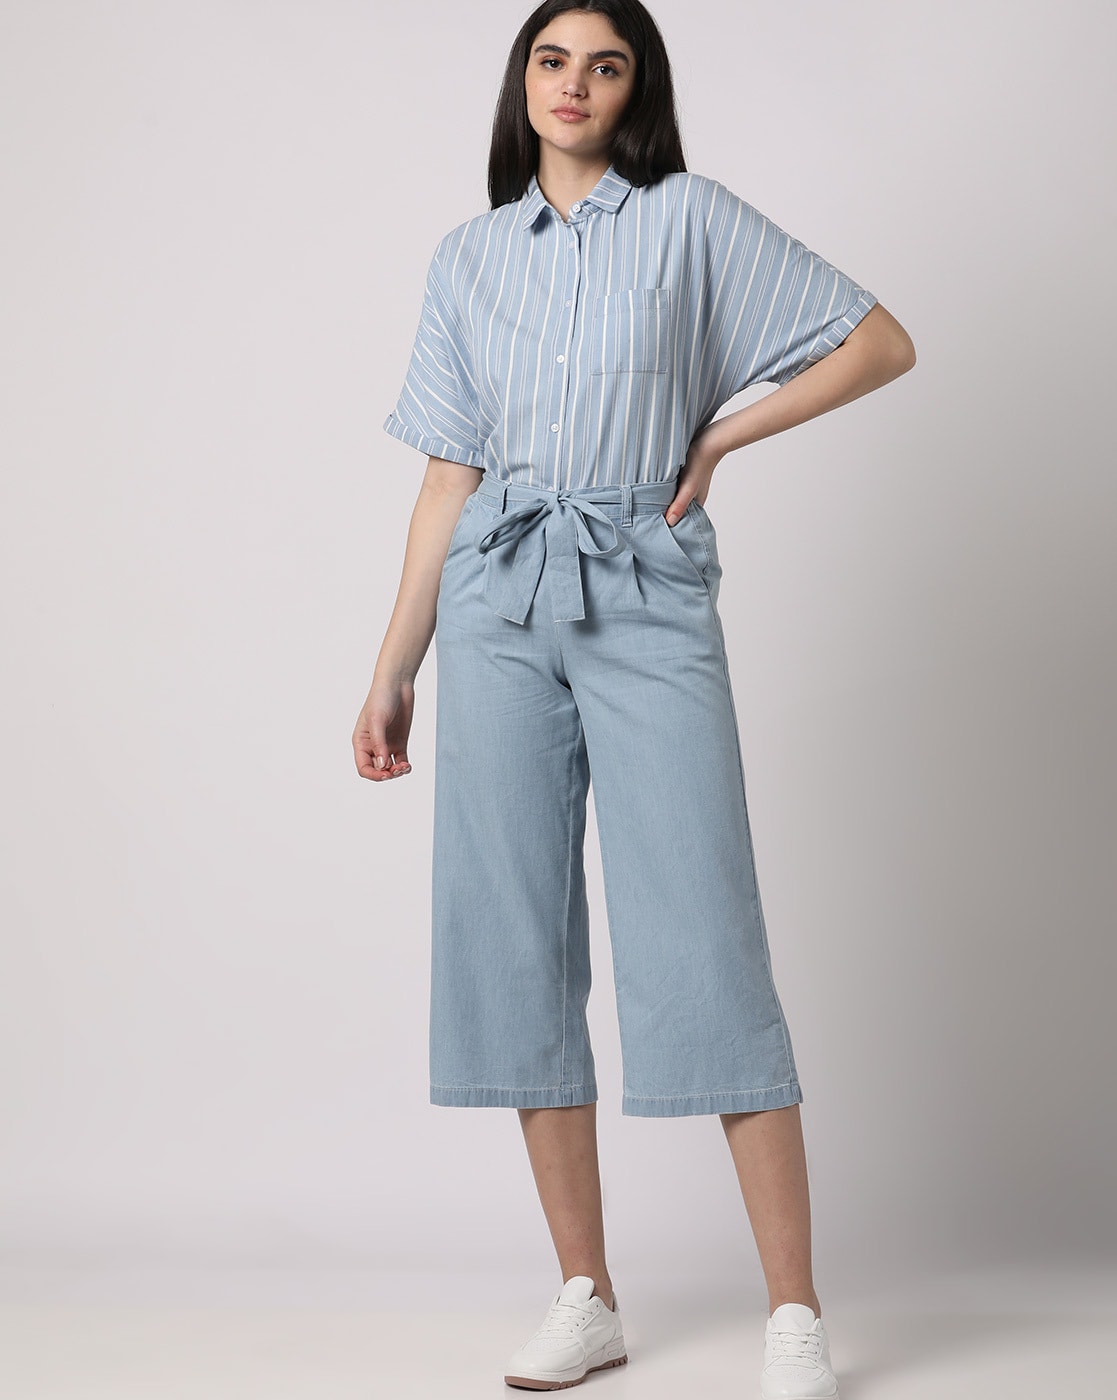 Denim Culottes for Women — choose from 35 items